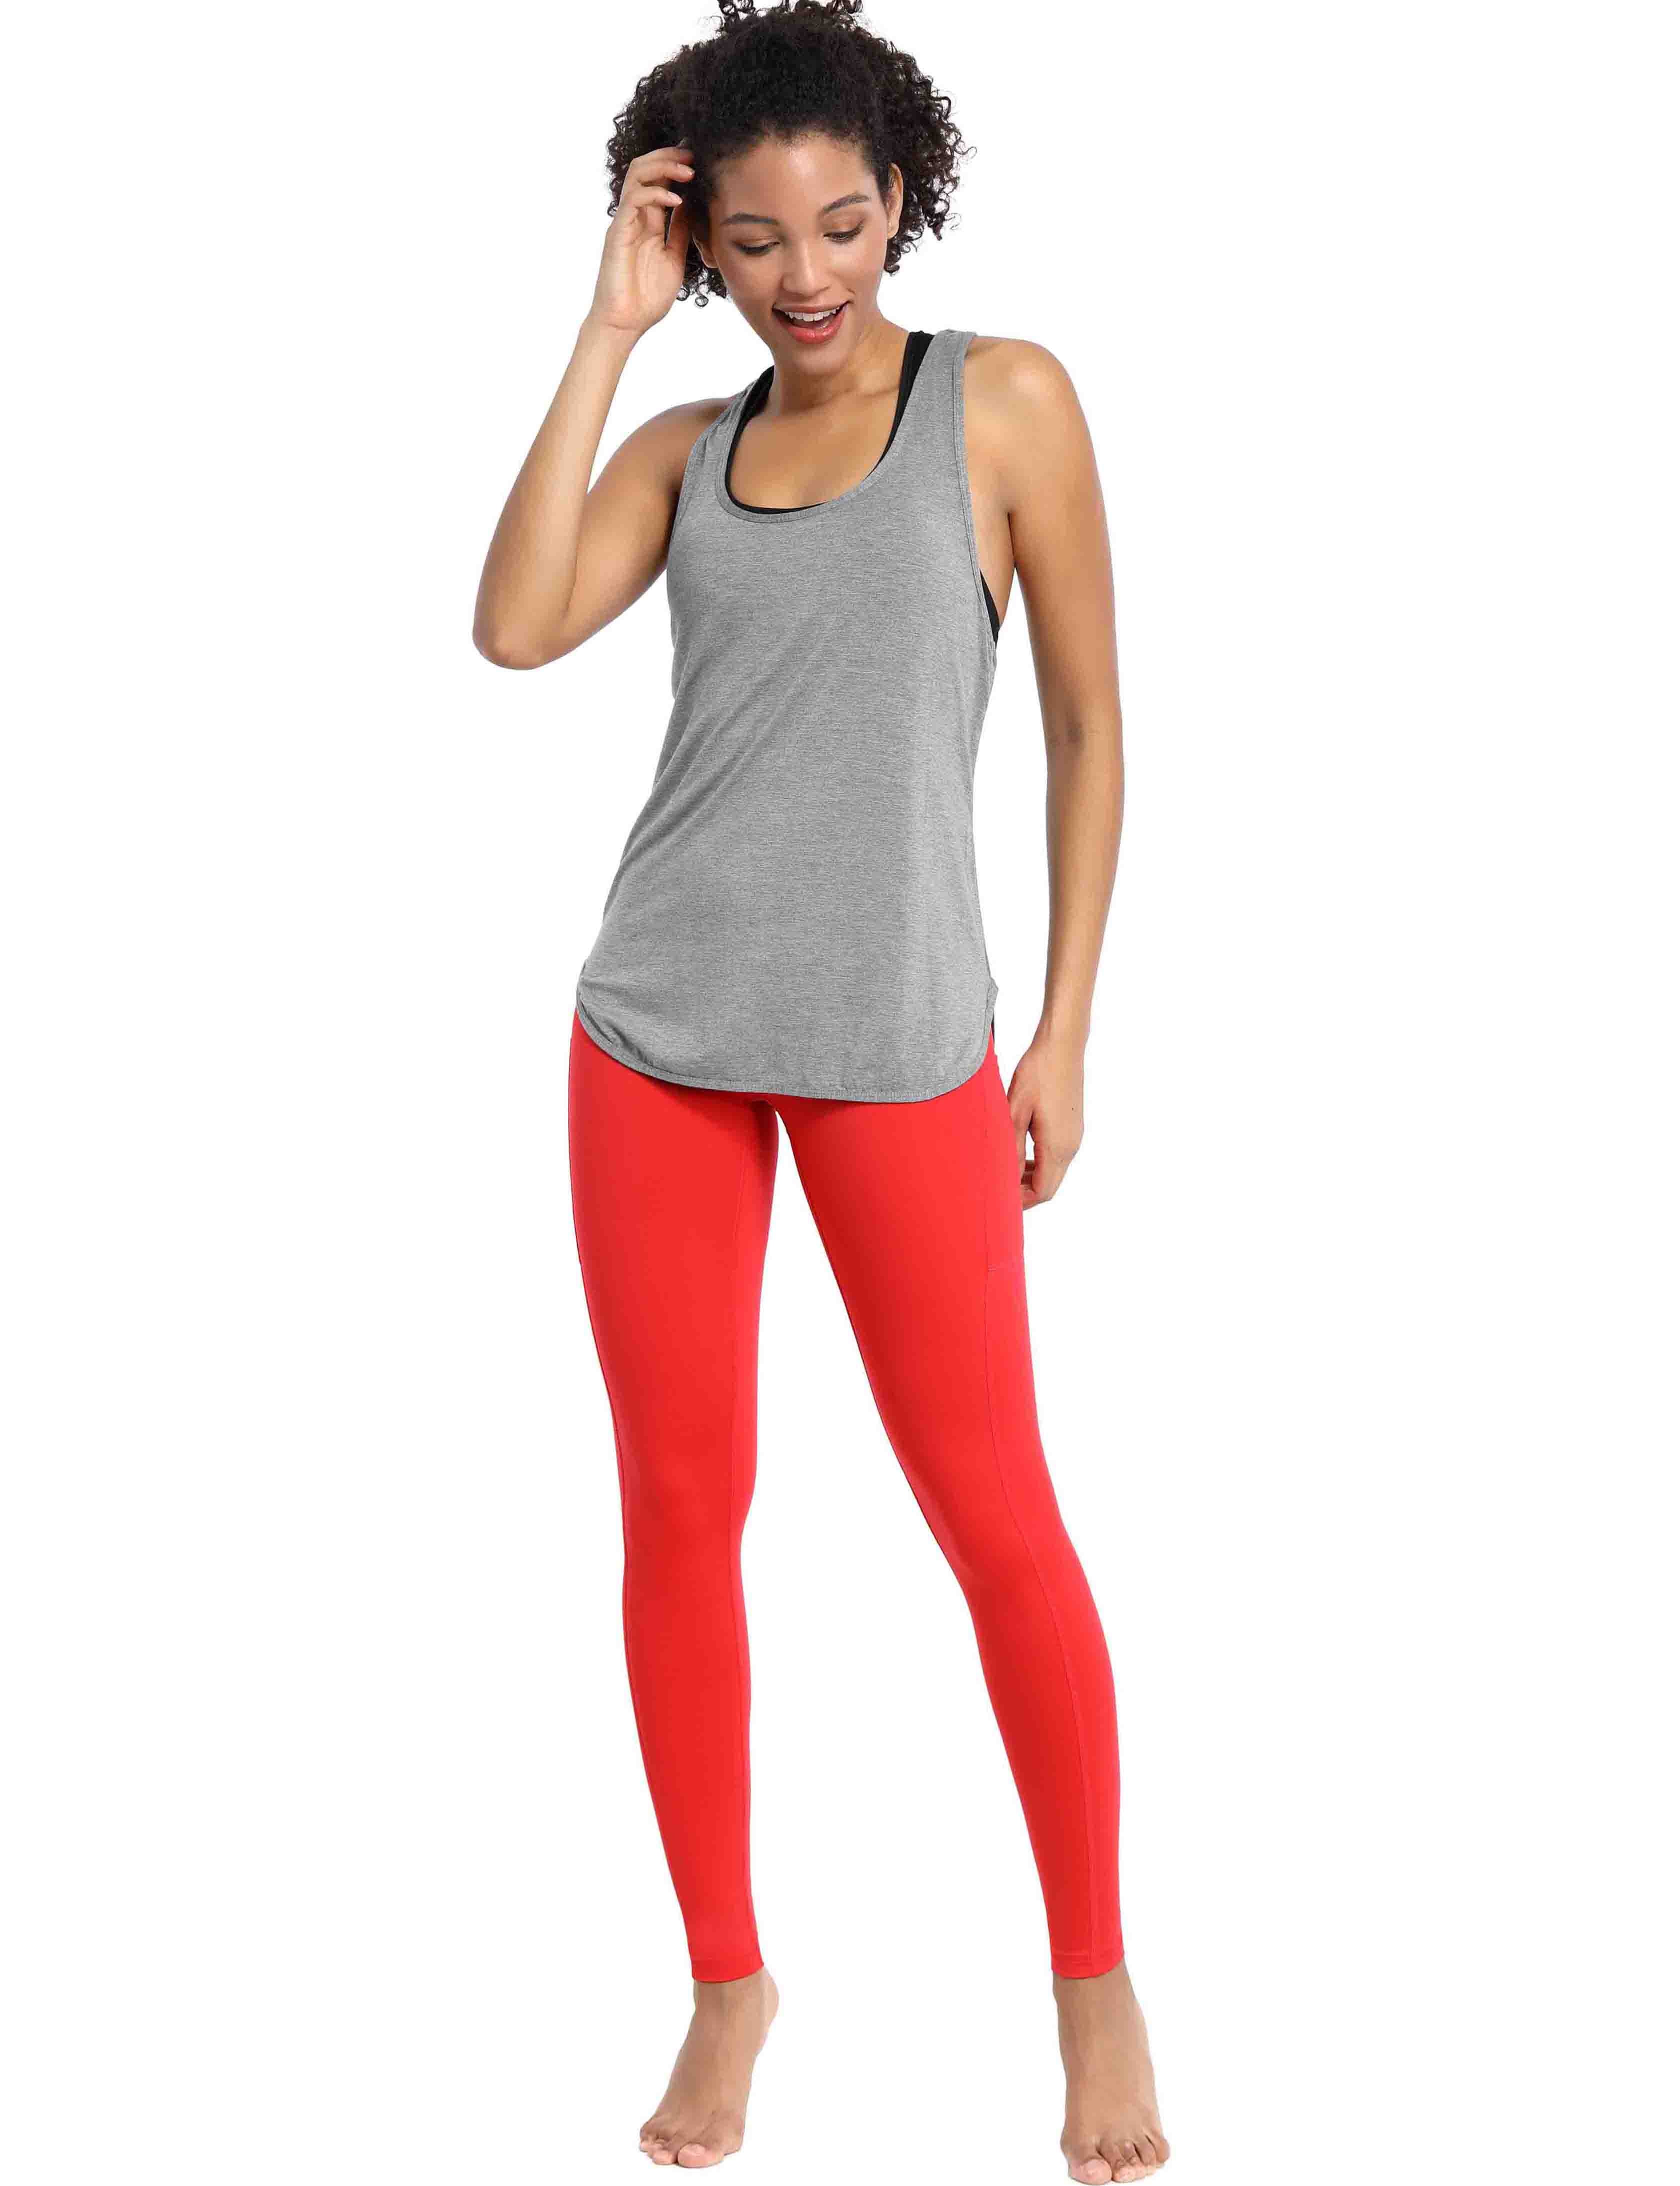 Loose Fit Racerback Tank Top heathergray Designed for On the Move Loose fit 93%Modal/7%Spandex Four-way stretch Naturally breathable Super-Soft, Modal Fabric